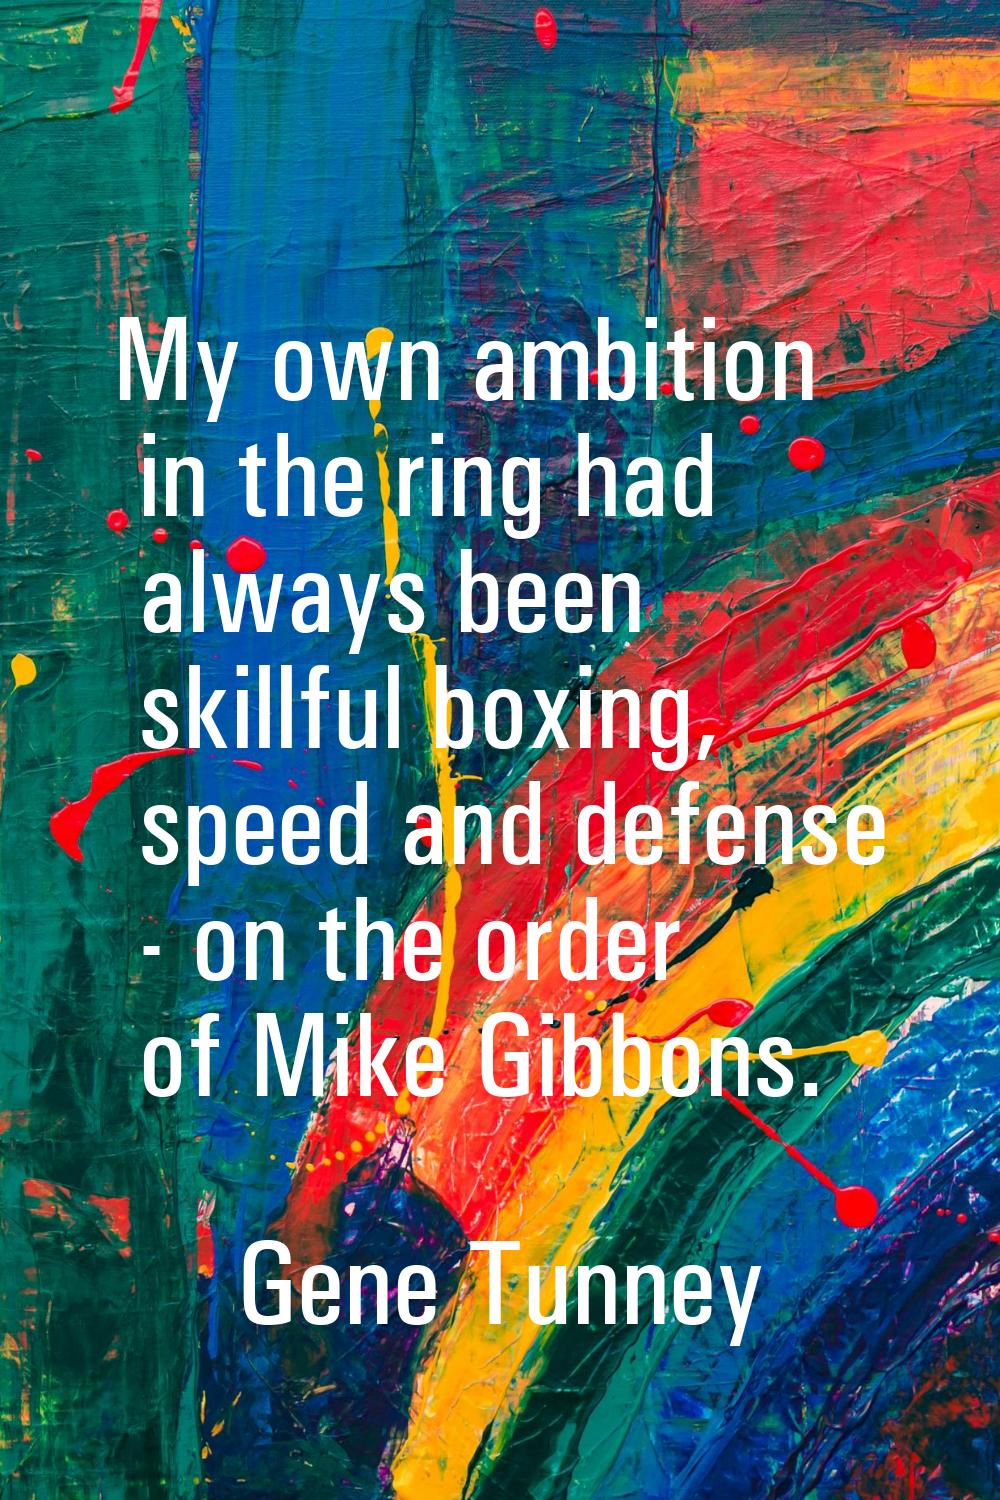 My own ambition in the ring had always been skillful boxing, speed and defense - on the order of Mi